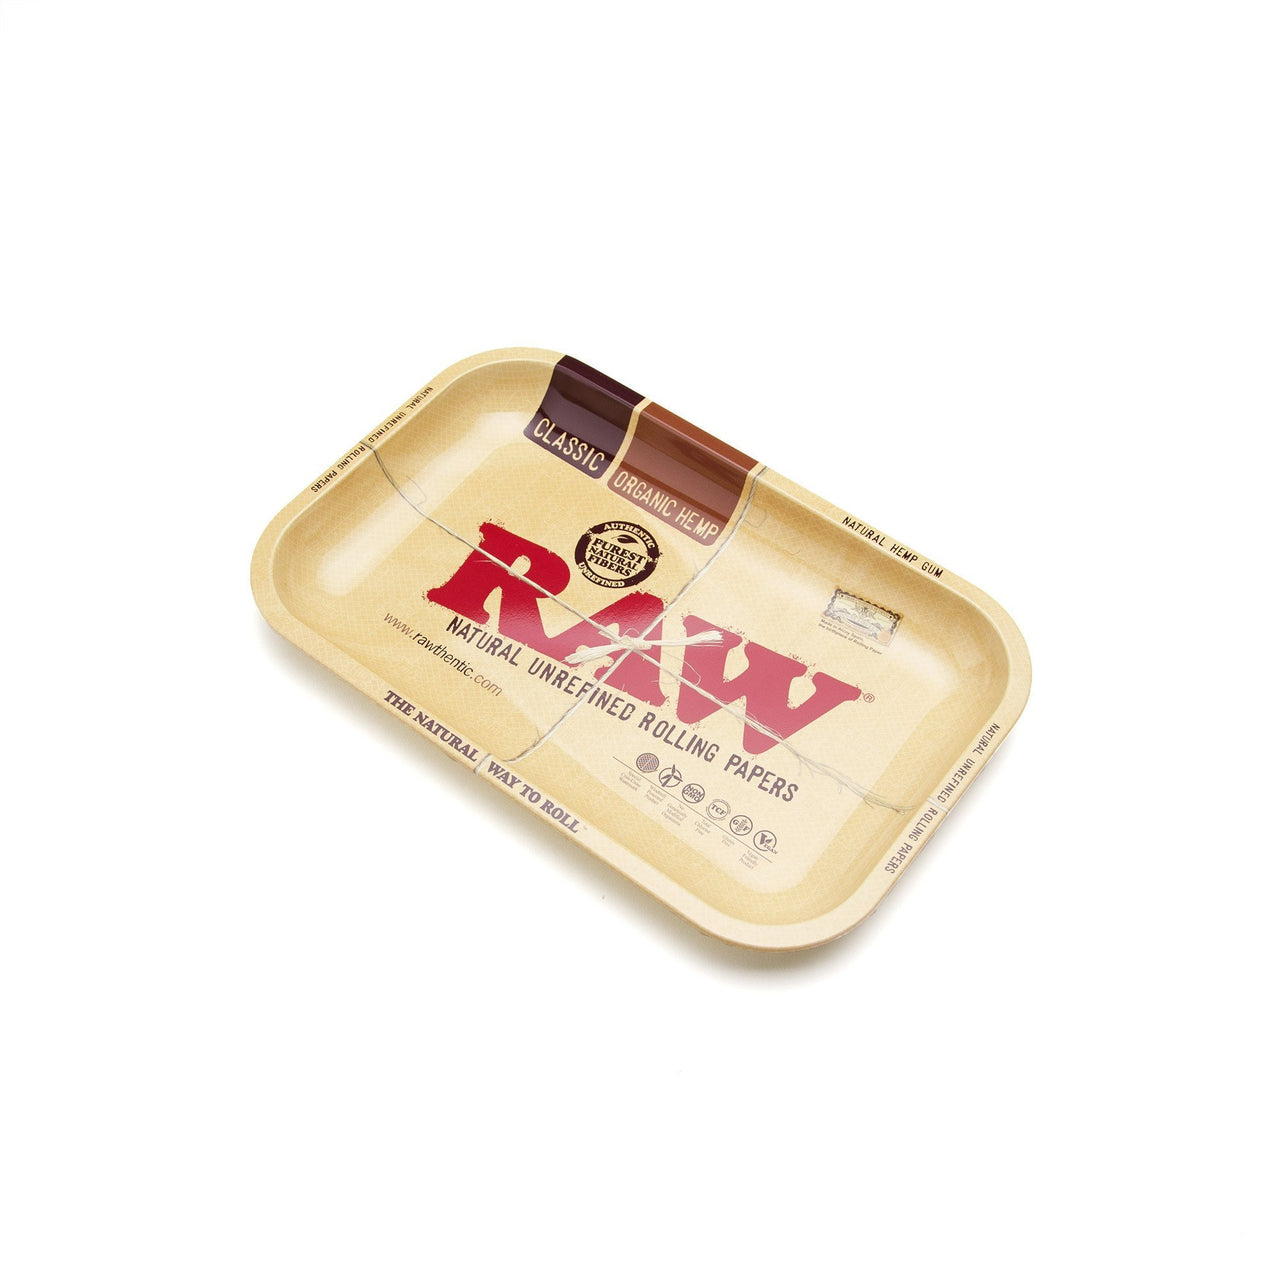 RAW Rolling Tray - Small - 420 Science - The most trusted online smoke shop.